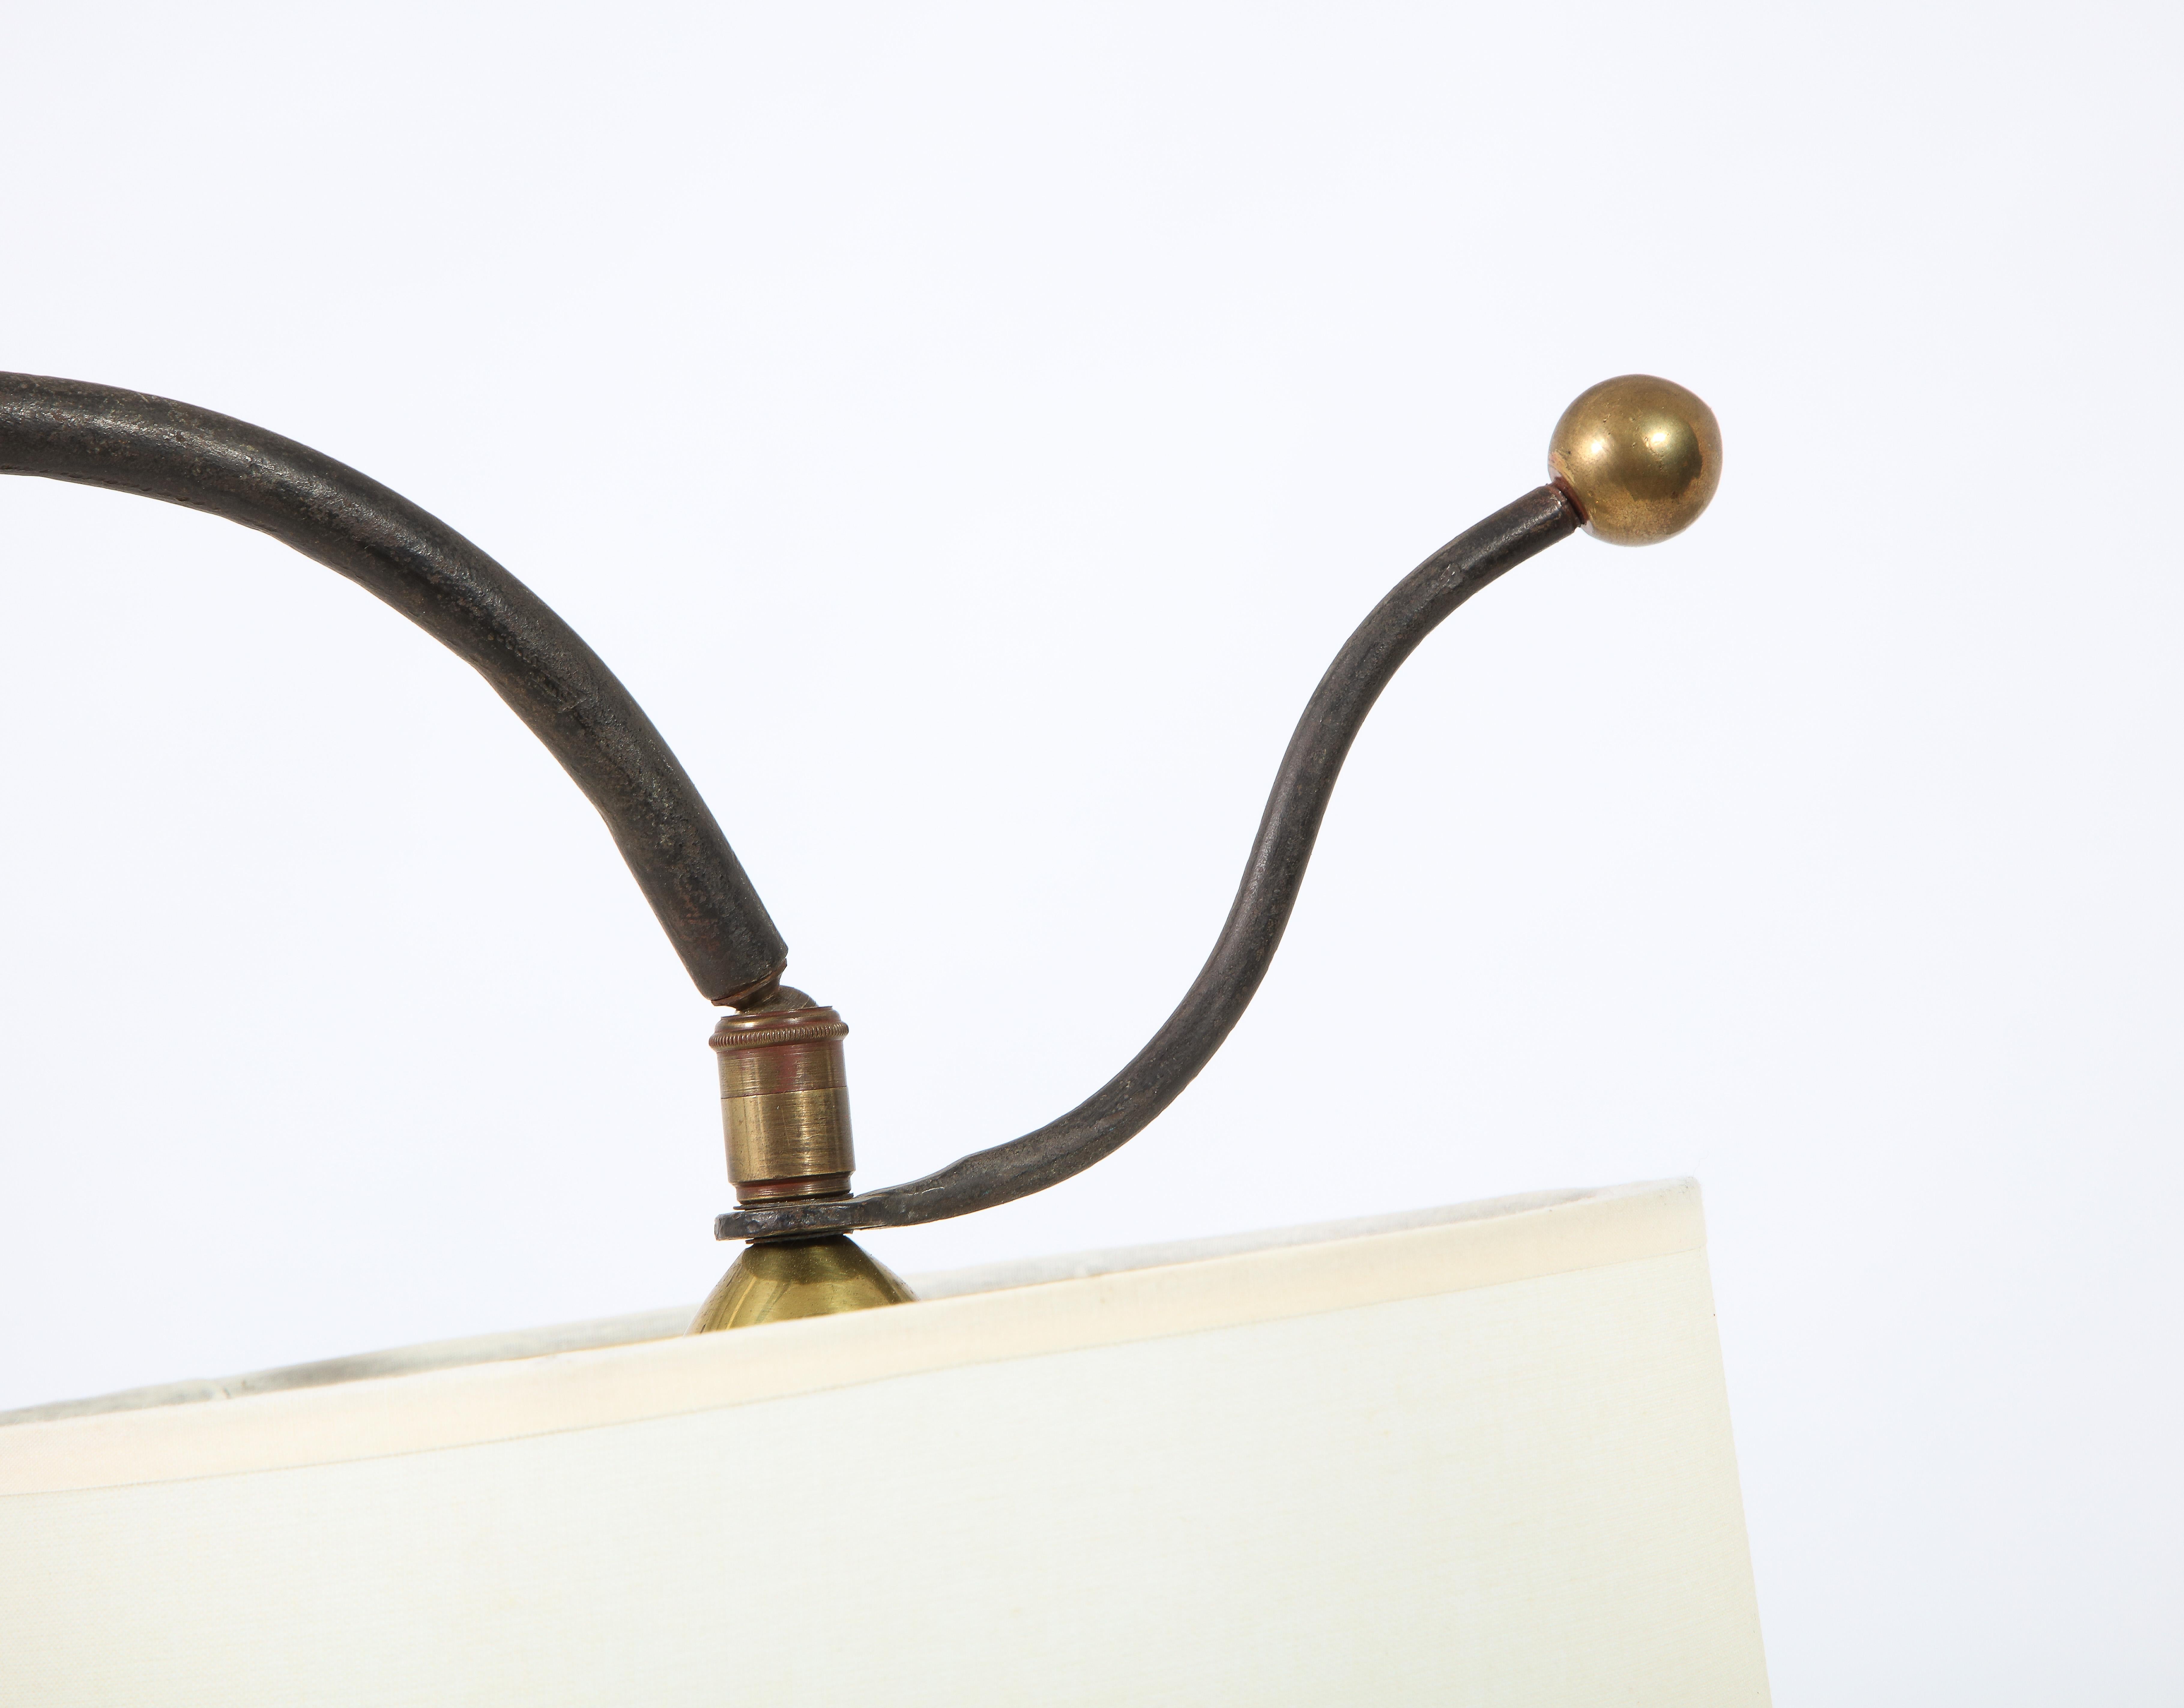 Adjustable Tripodal Cantilevered Wrought Iron & Brass Floor Lamp, France 1950's For Sale 3